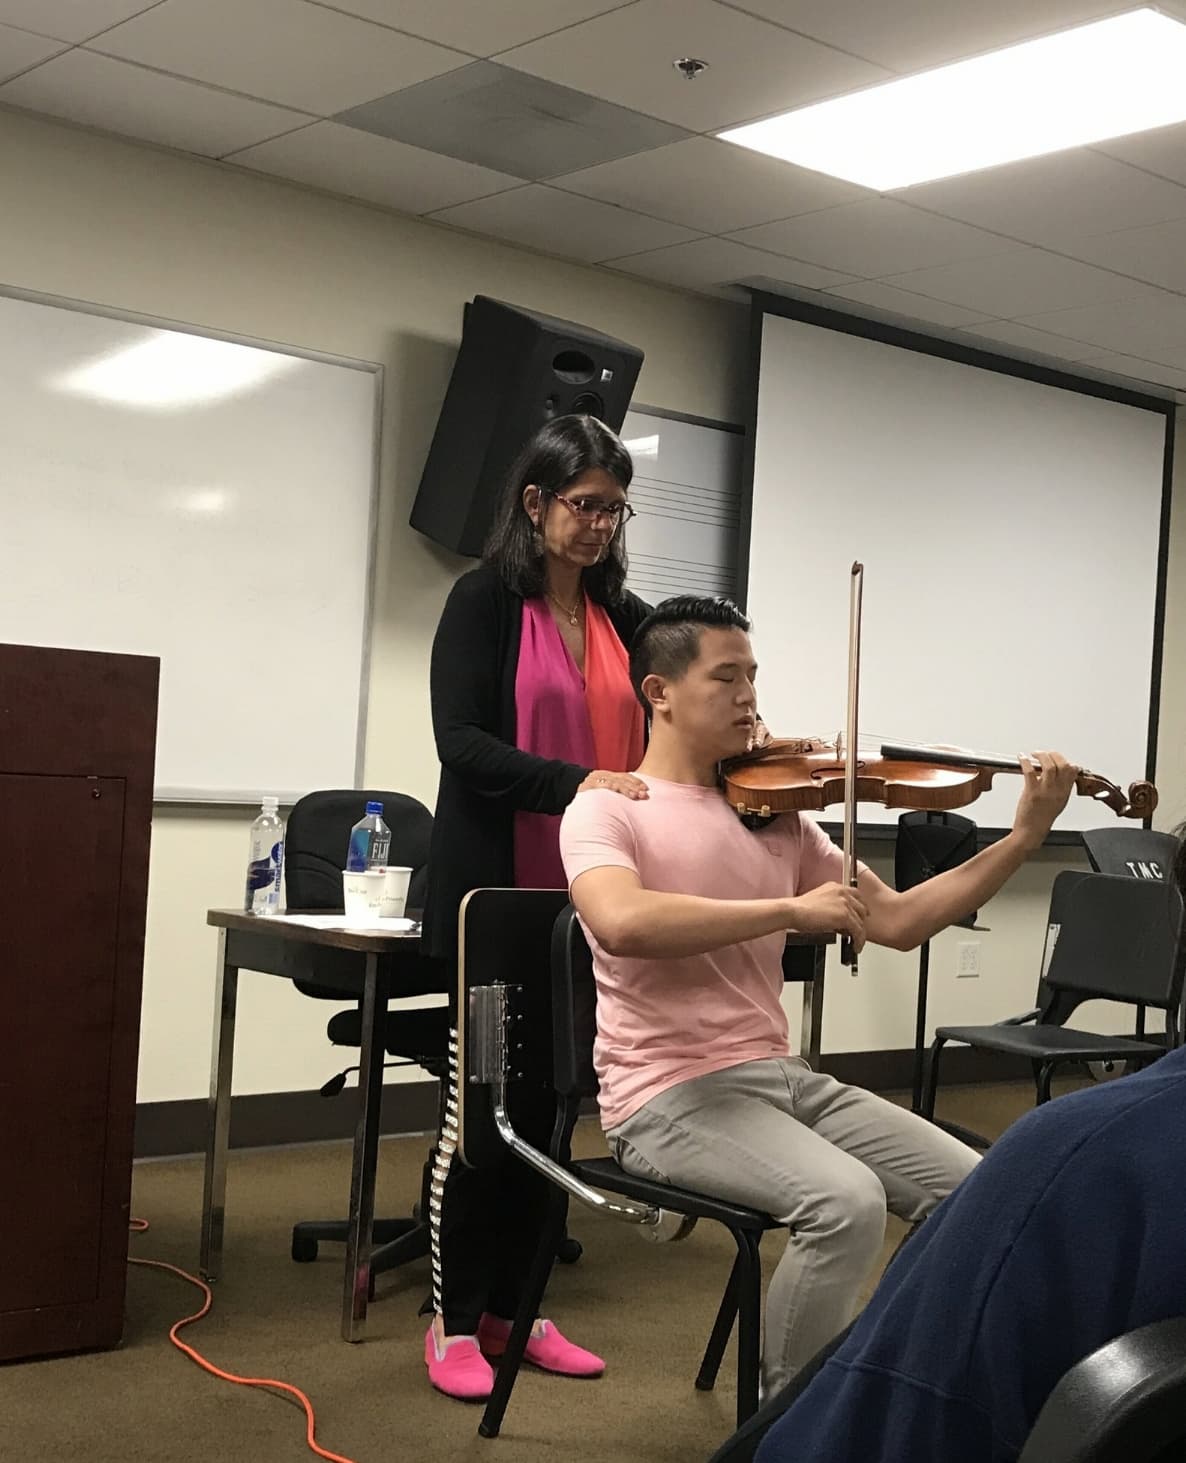 Pamela Frank in a session of “Fit as a Fiddle”